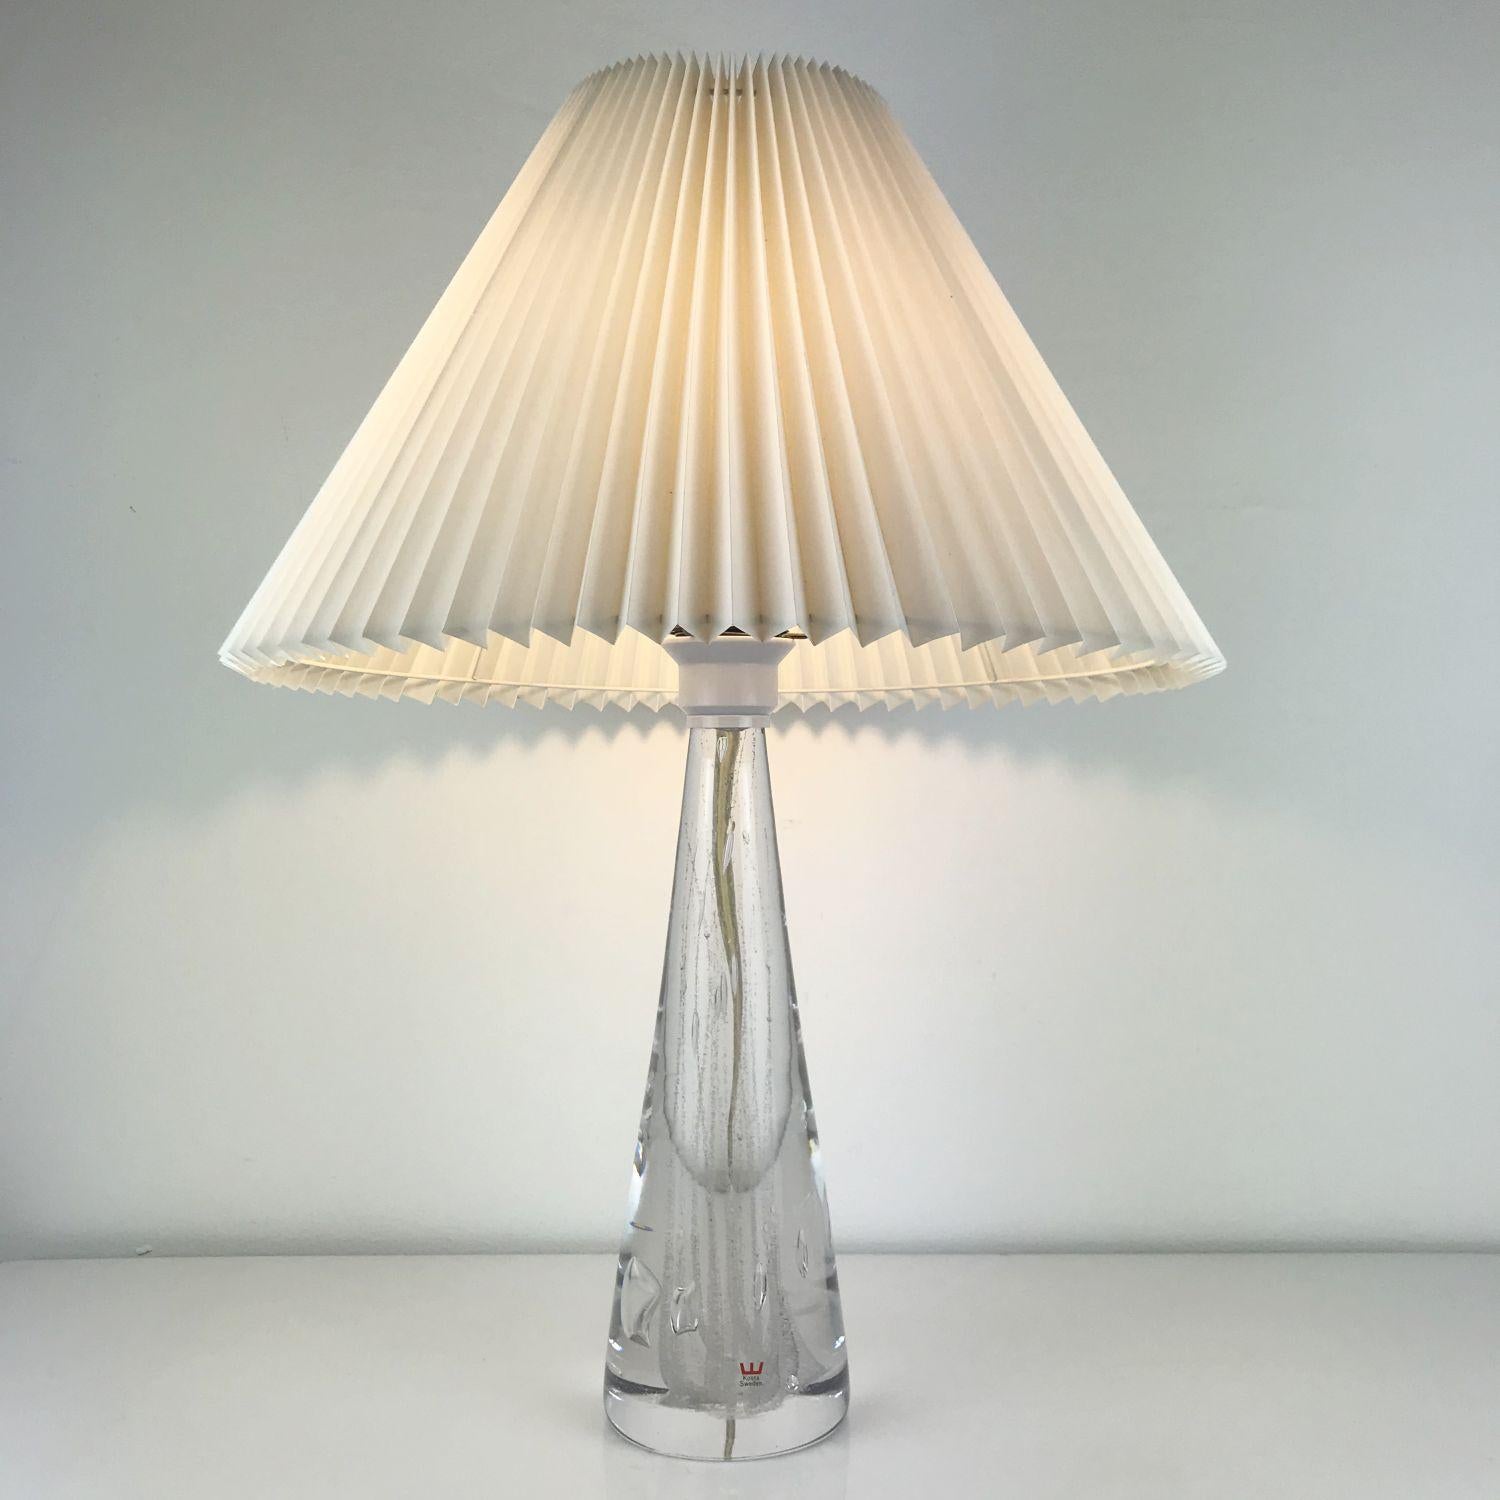 Tall and unique glass table lamp by swedish glasss master Vicke Lindstrand with 'bubbles' and 'swirls' inside the glass. Manufactured by Kosta in the 60's. 

Comes with the original working wire with on/off. Edison screw bulb. Sold without the